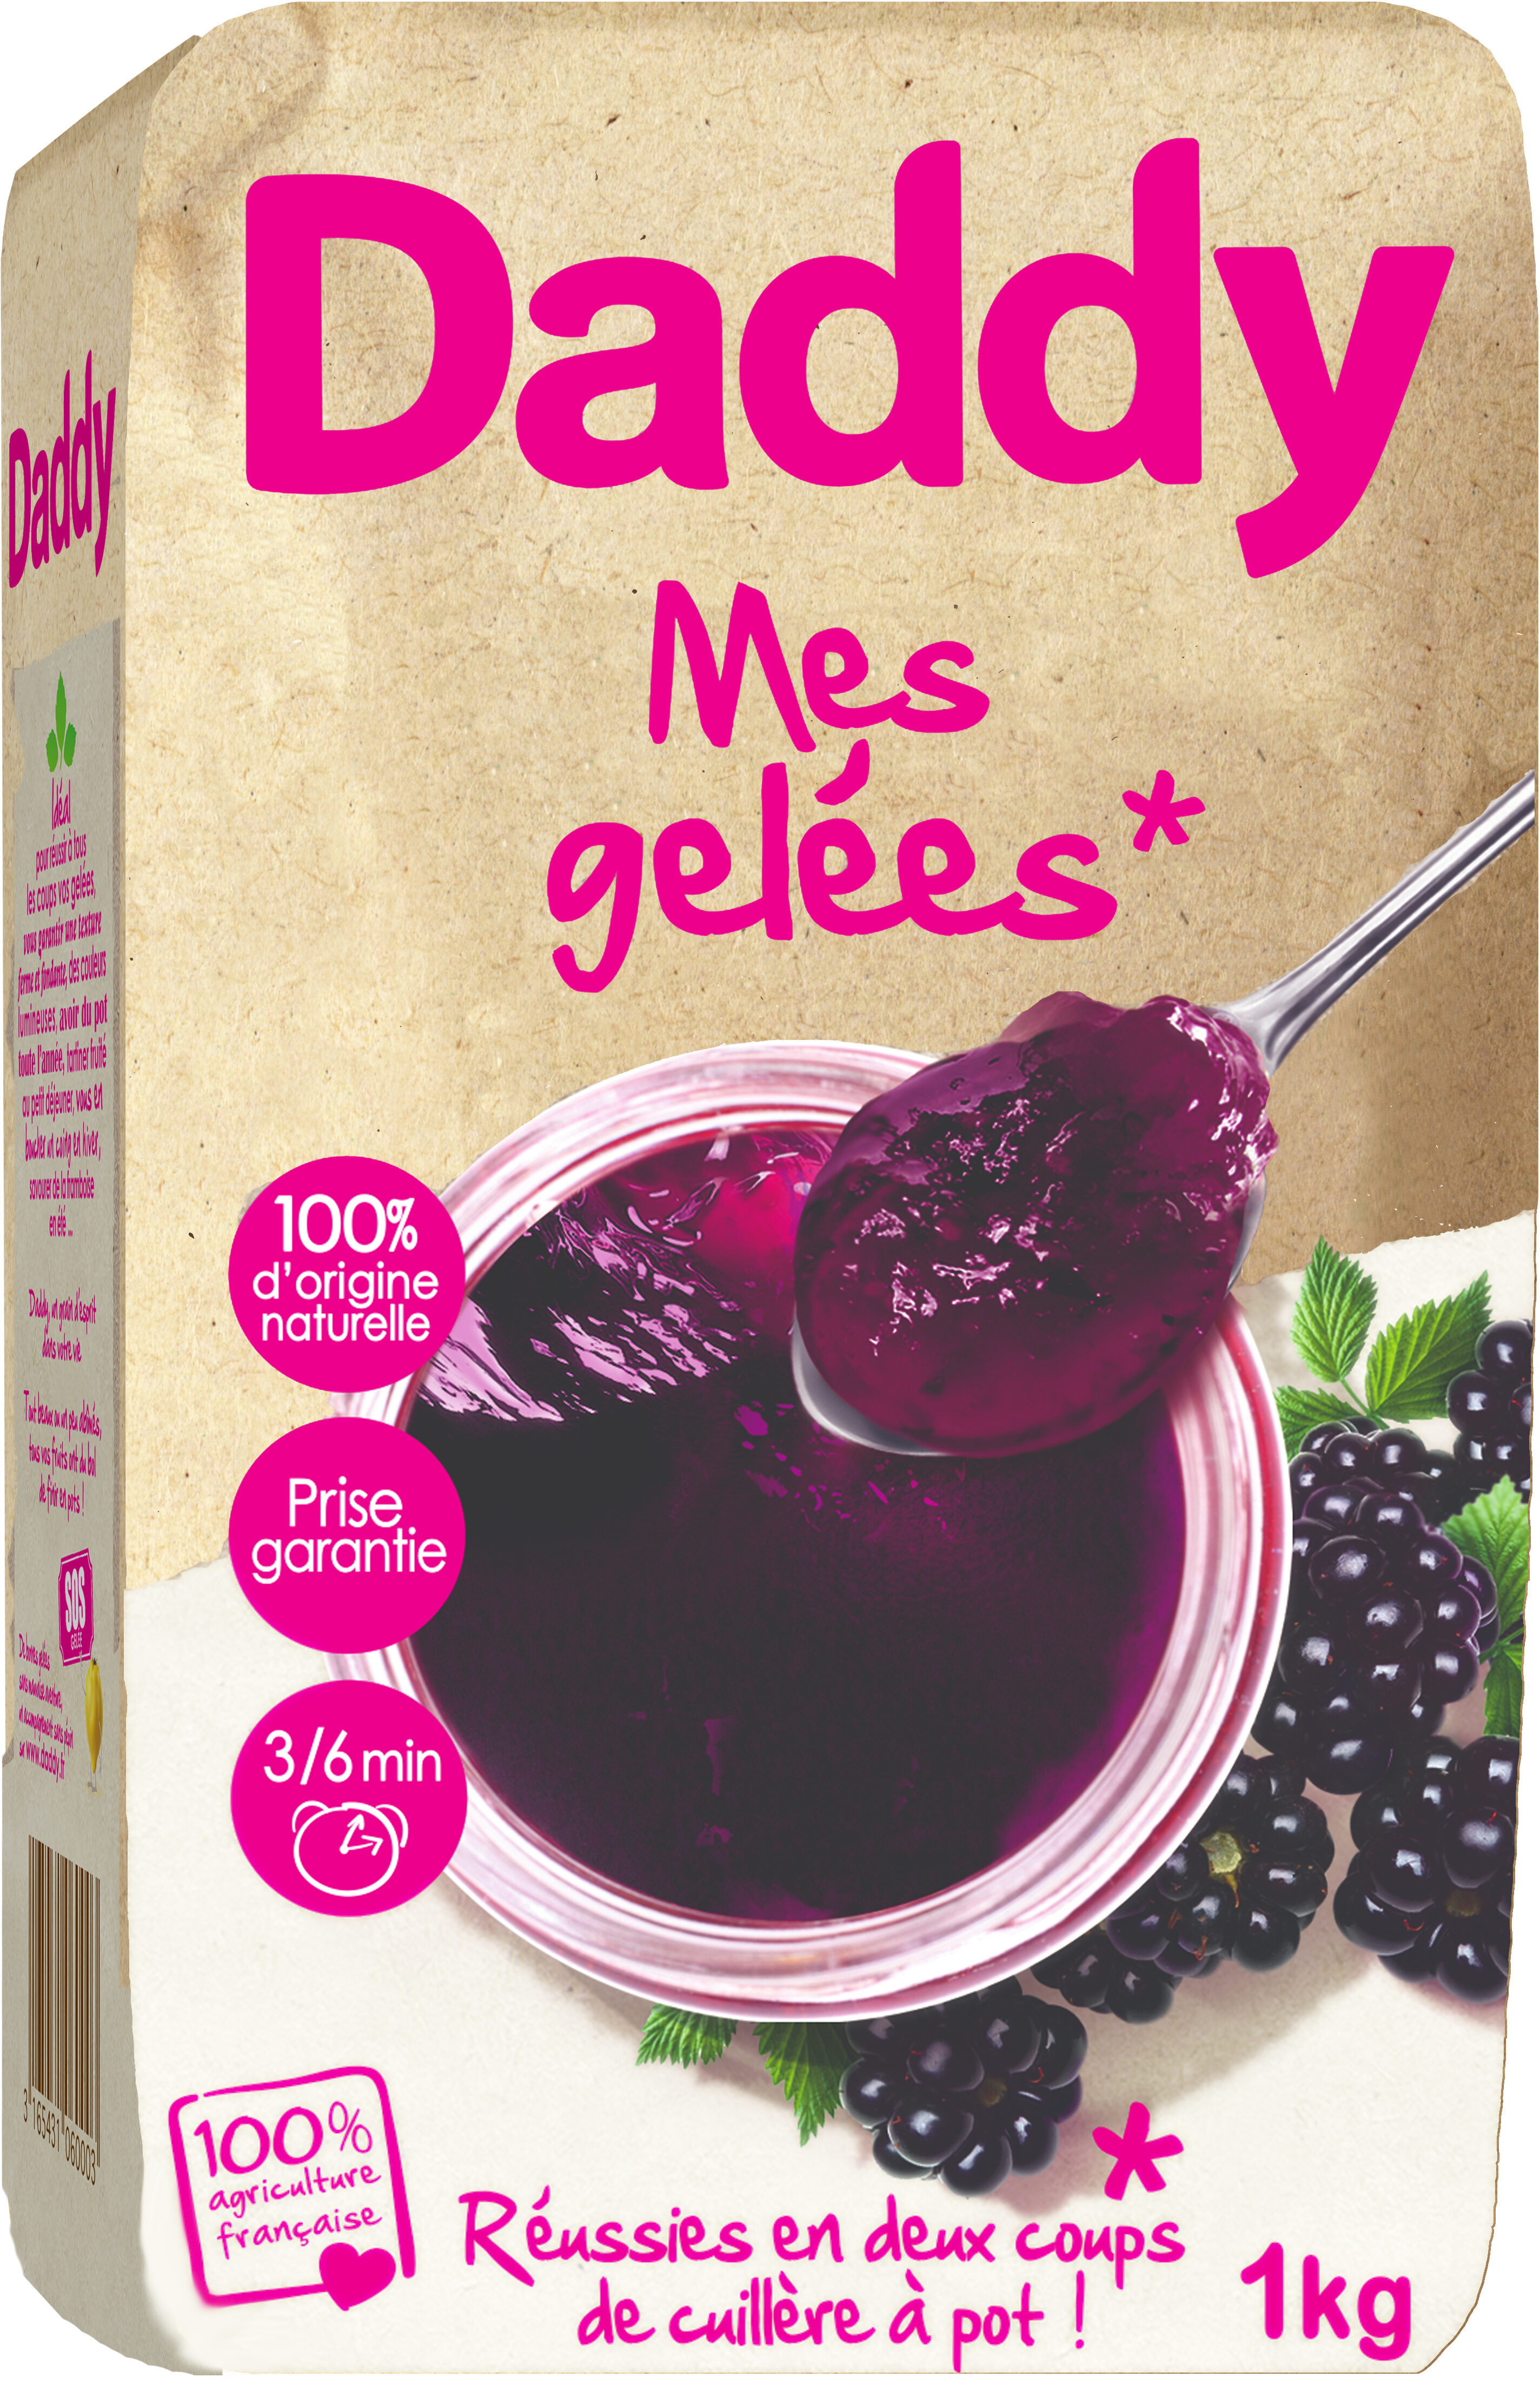 Daddy confidelice special gelee 1kg - Product - fr